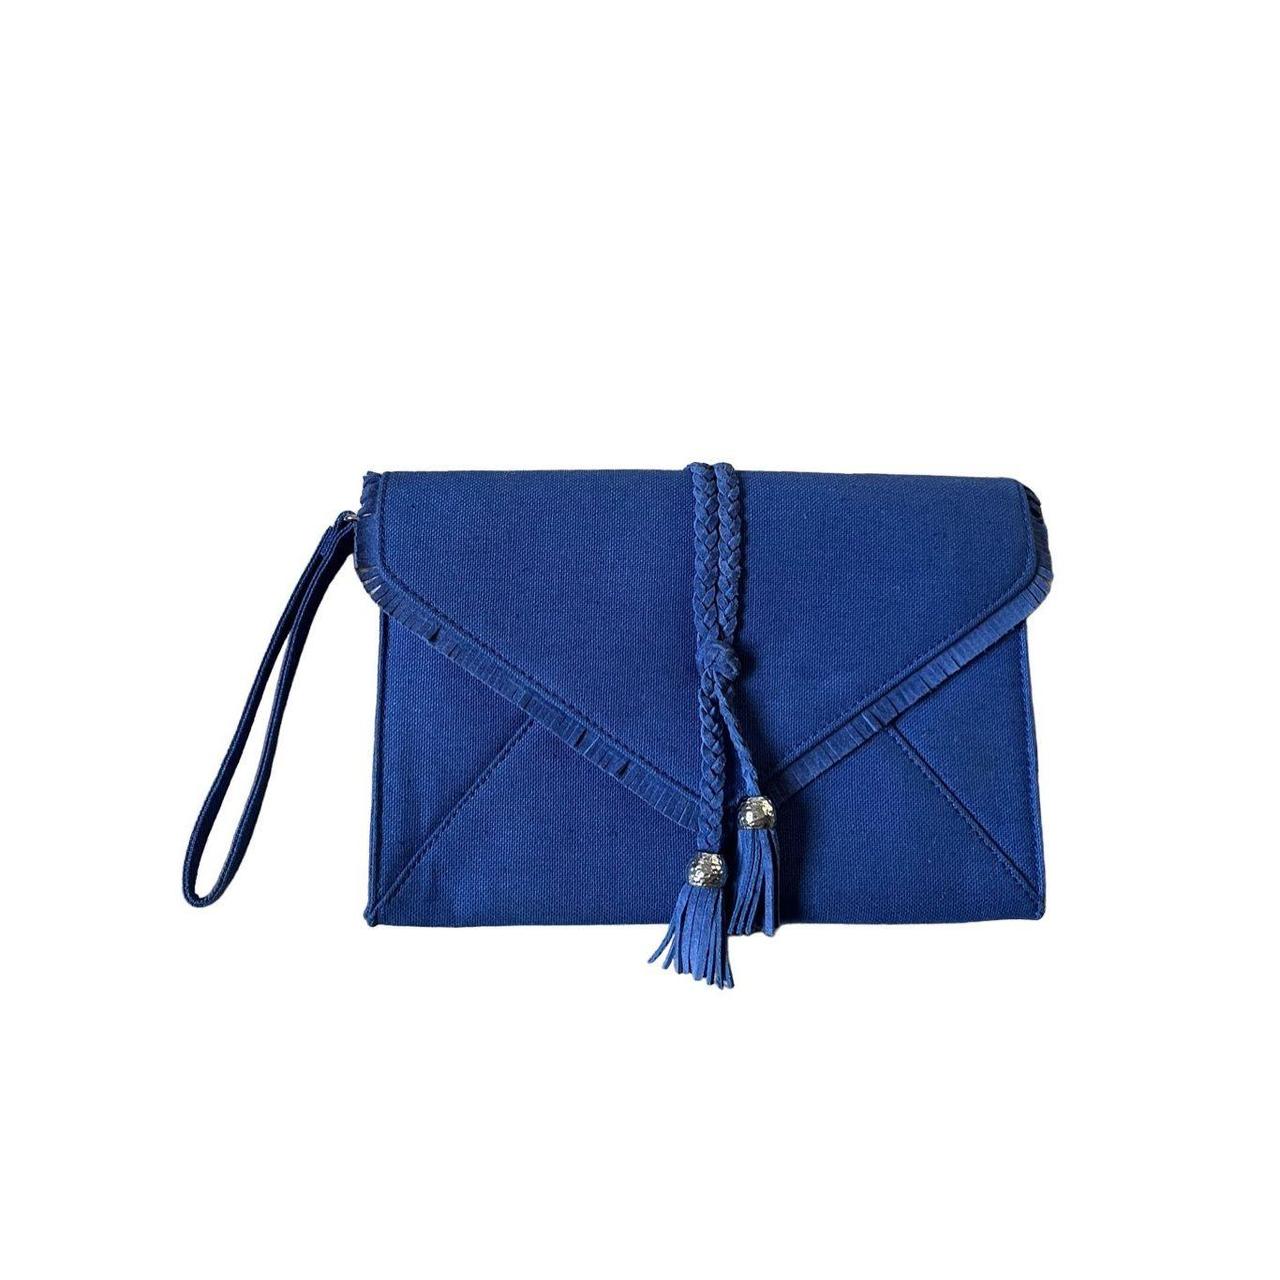 Small Clutch Bag in Navy Suede with Cross Body Option - Personalised -  Handmade in England by Will Bees Bespoke